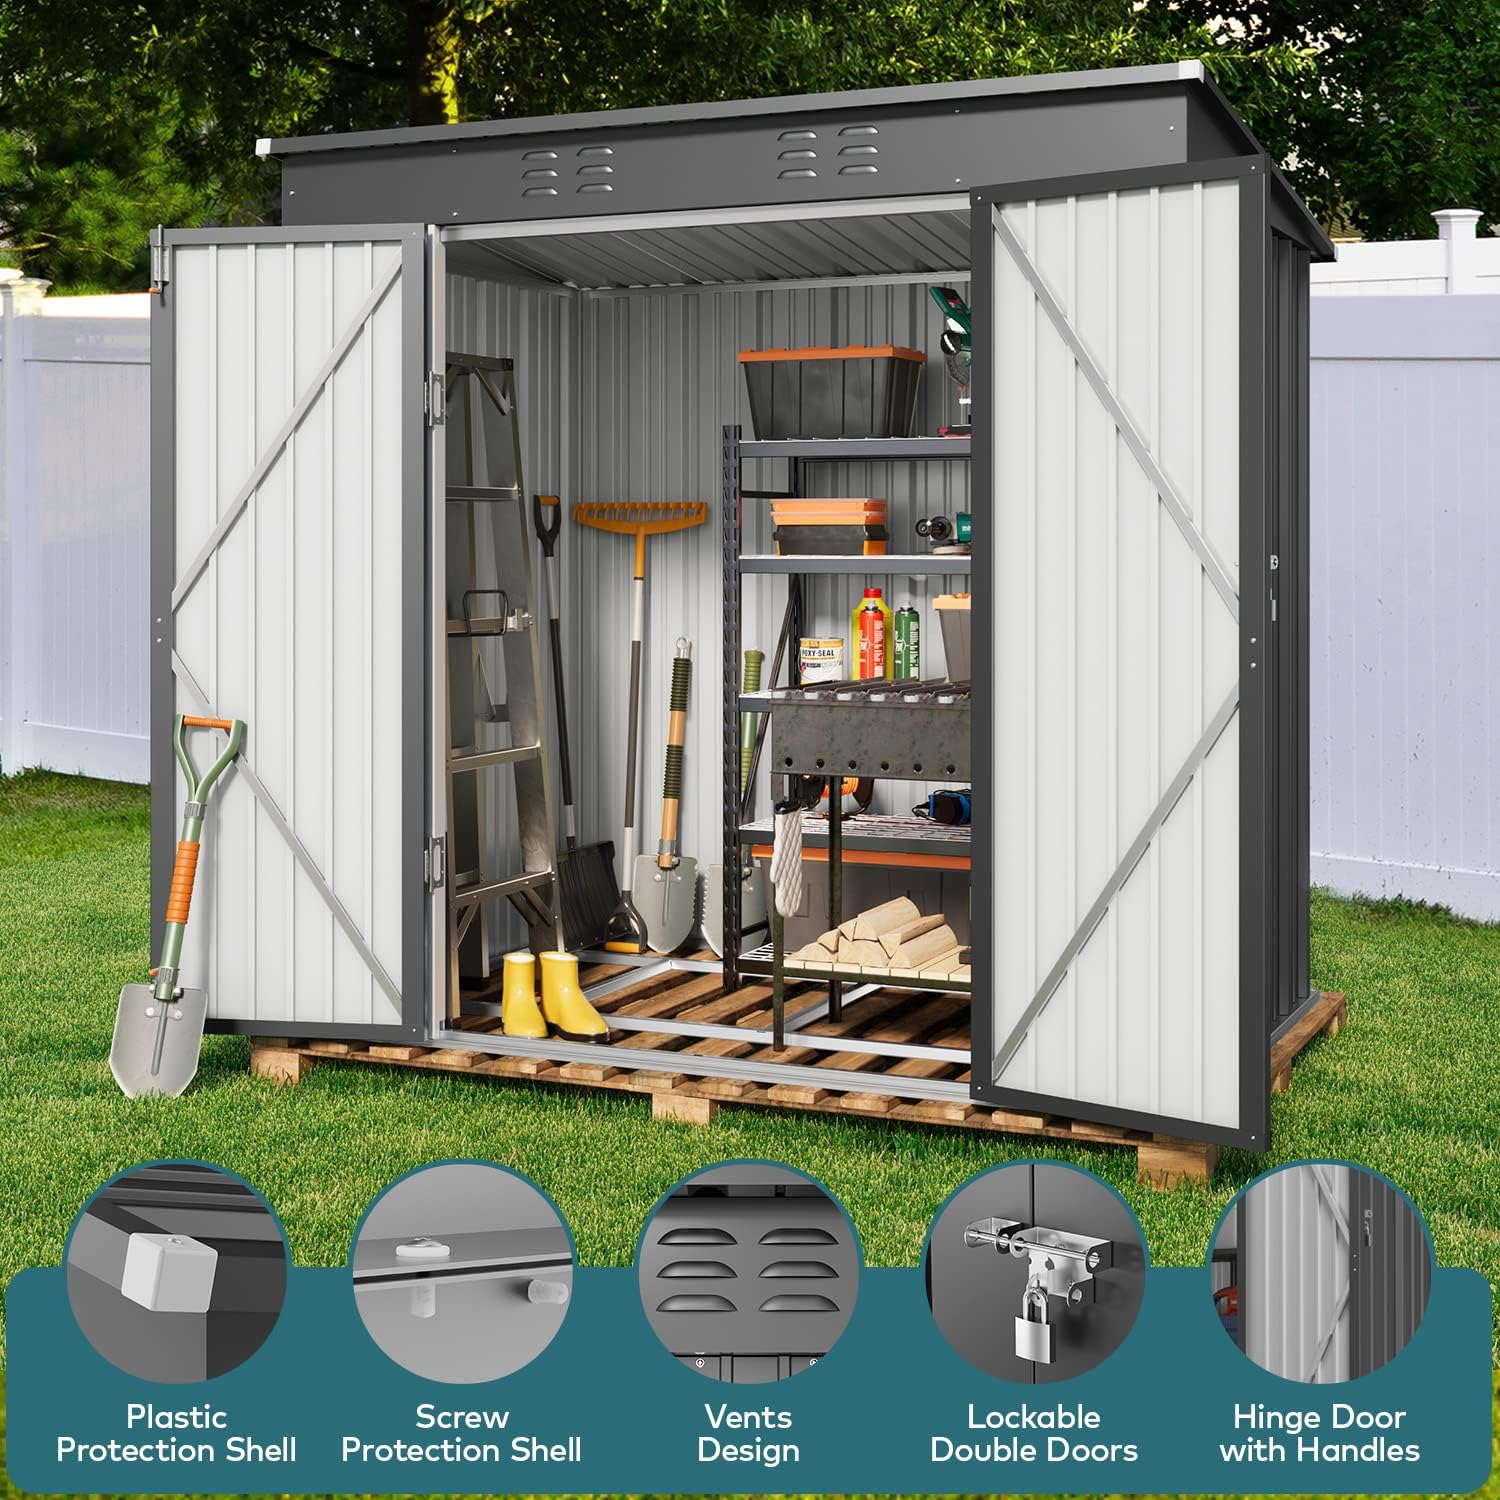 Gizoon 6x4 Outdoor Storage Shed features